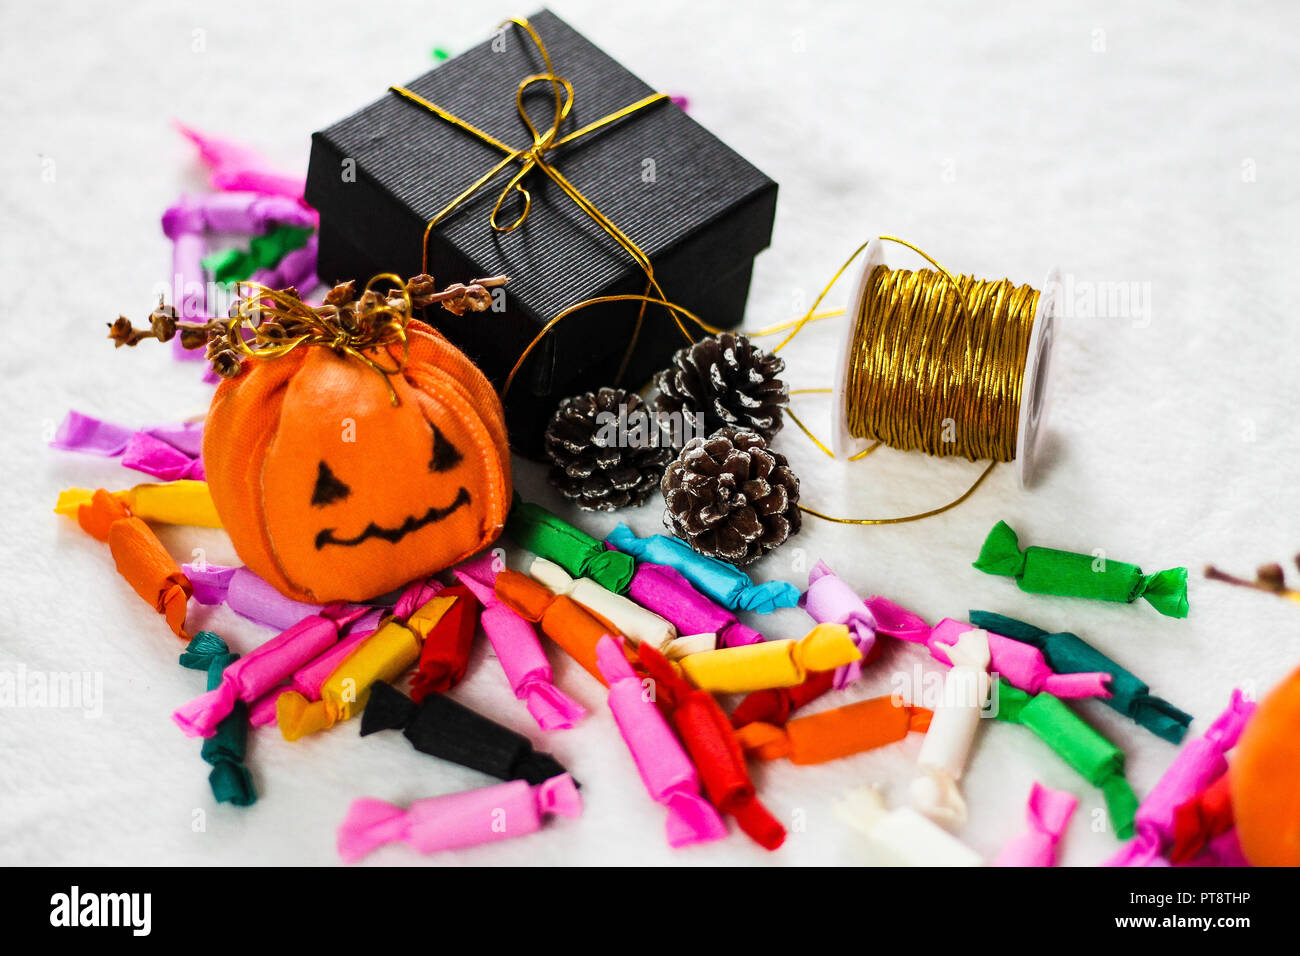 Simple handmade jack o lantern decorations and colorful candy for trick or treat during halloween Stock Photo